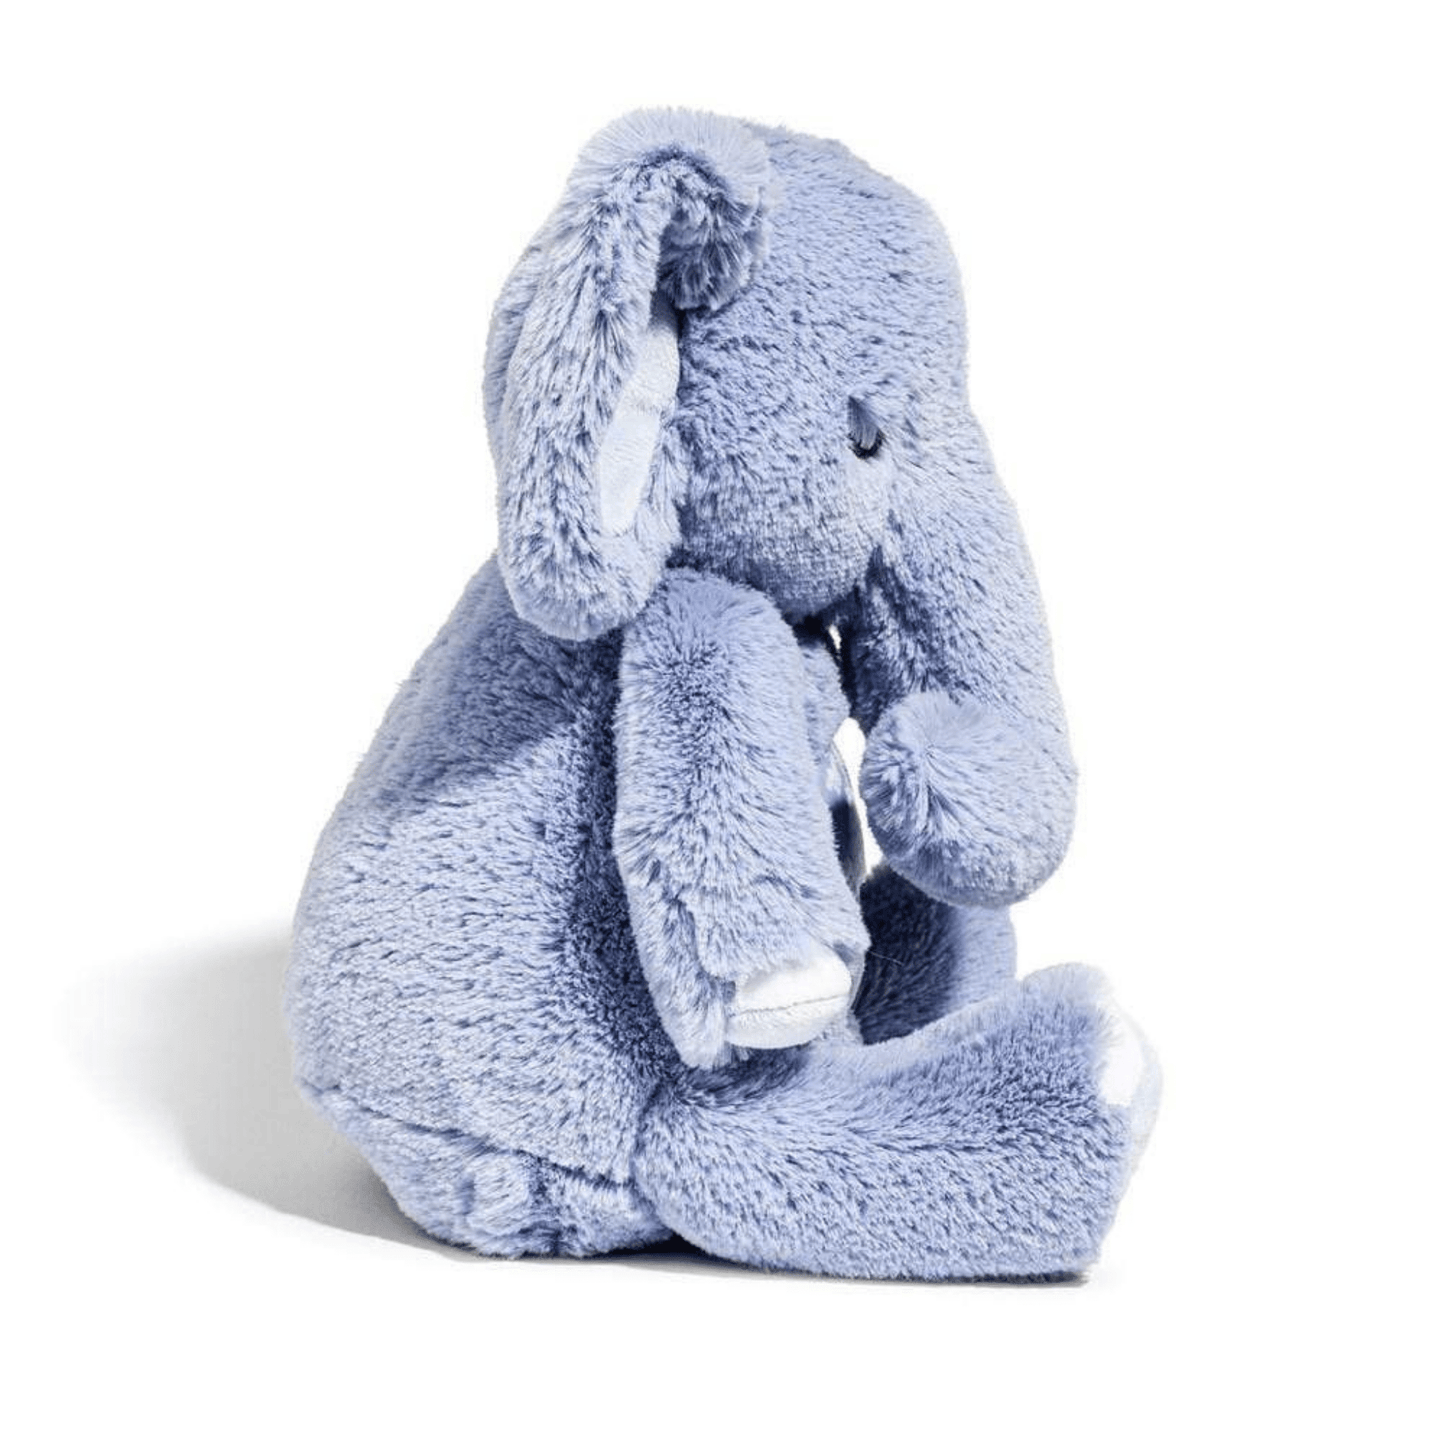 FAO Schwarz Elephant Soother Plush Toy with LED Lights and Sounds FAO Schwarz Elephant Soother Plush Toy with LED Lights and Sounds 